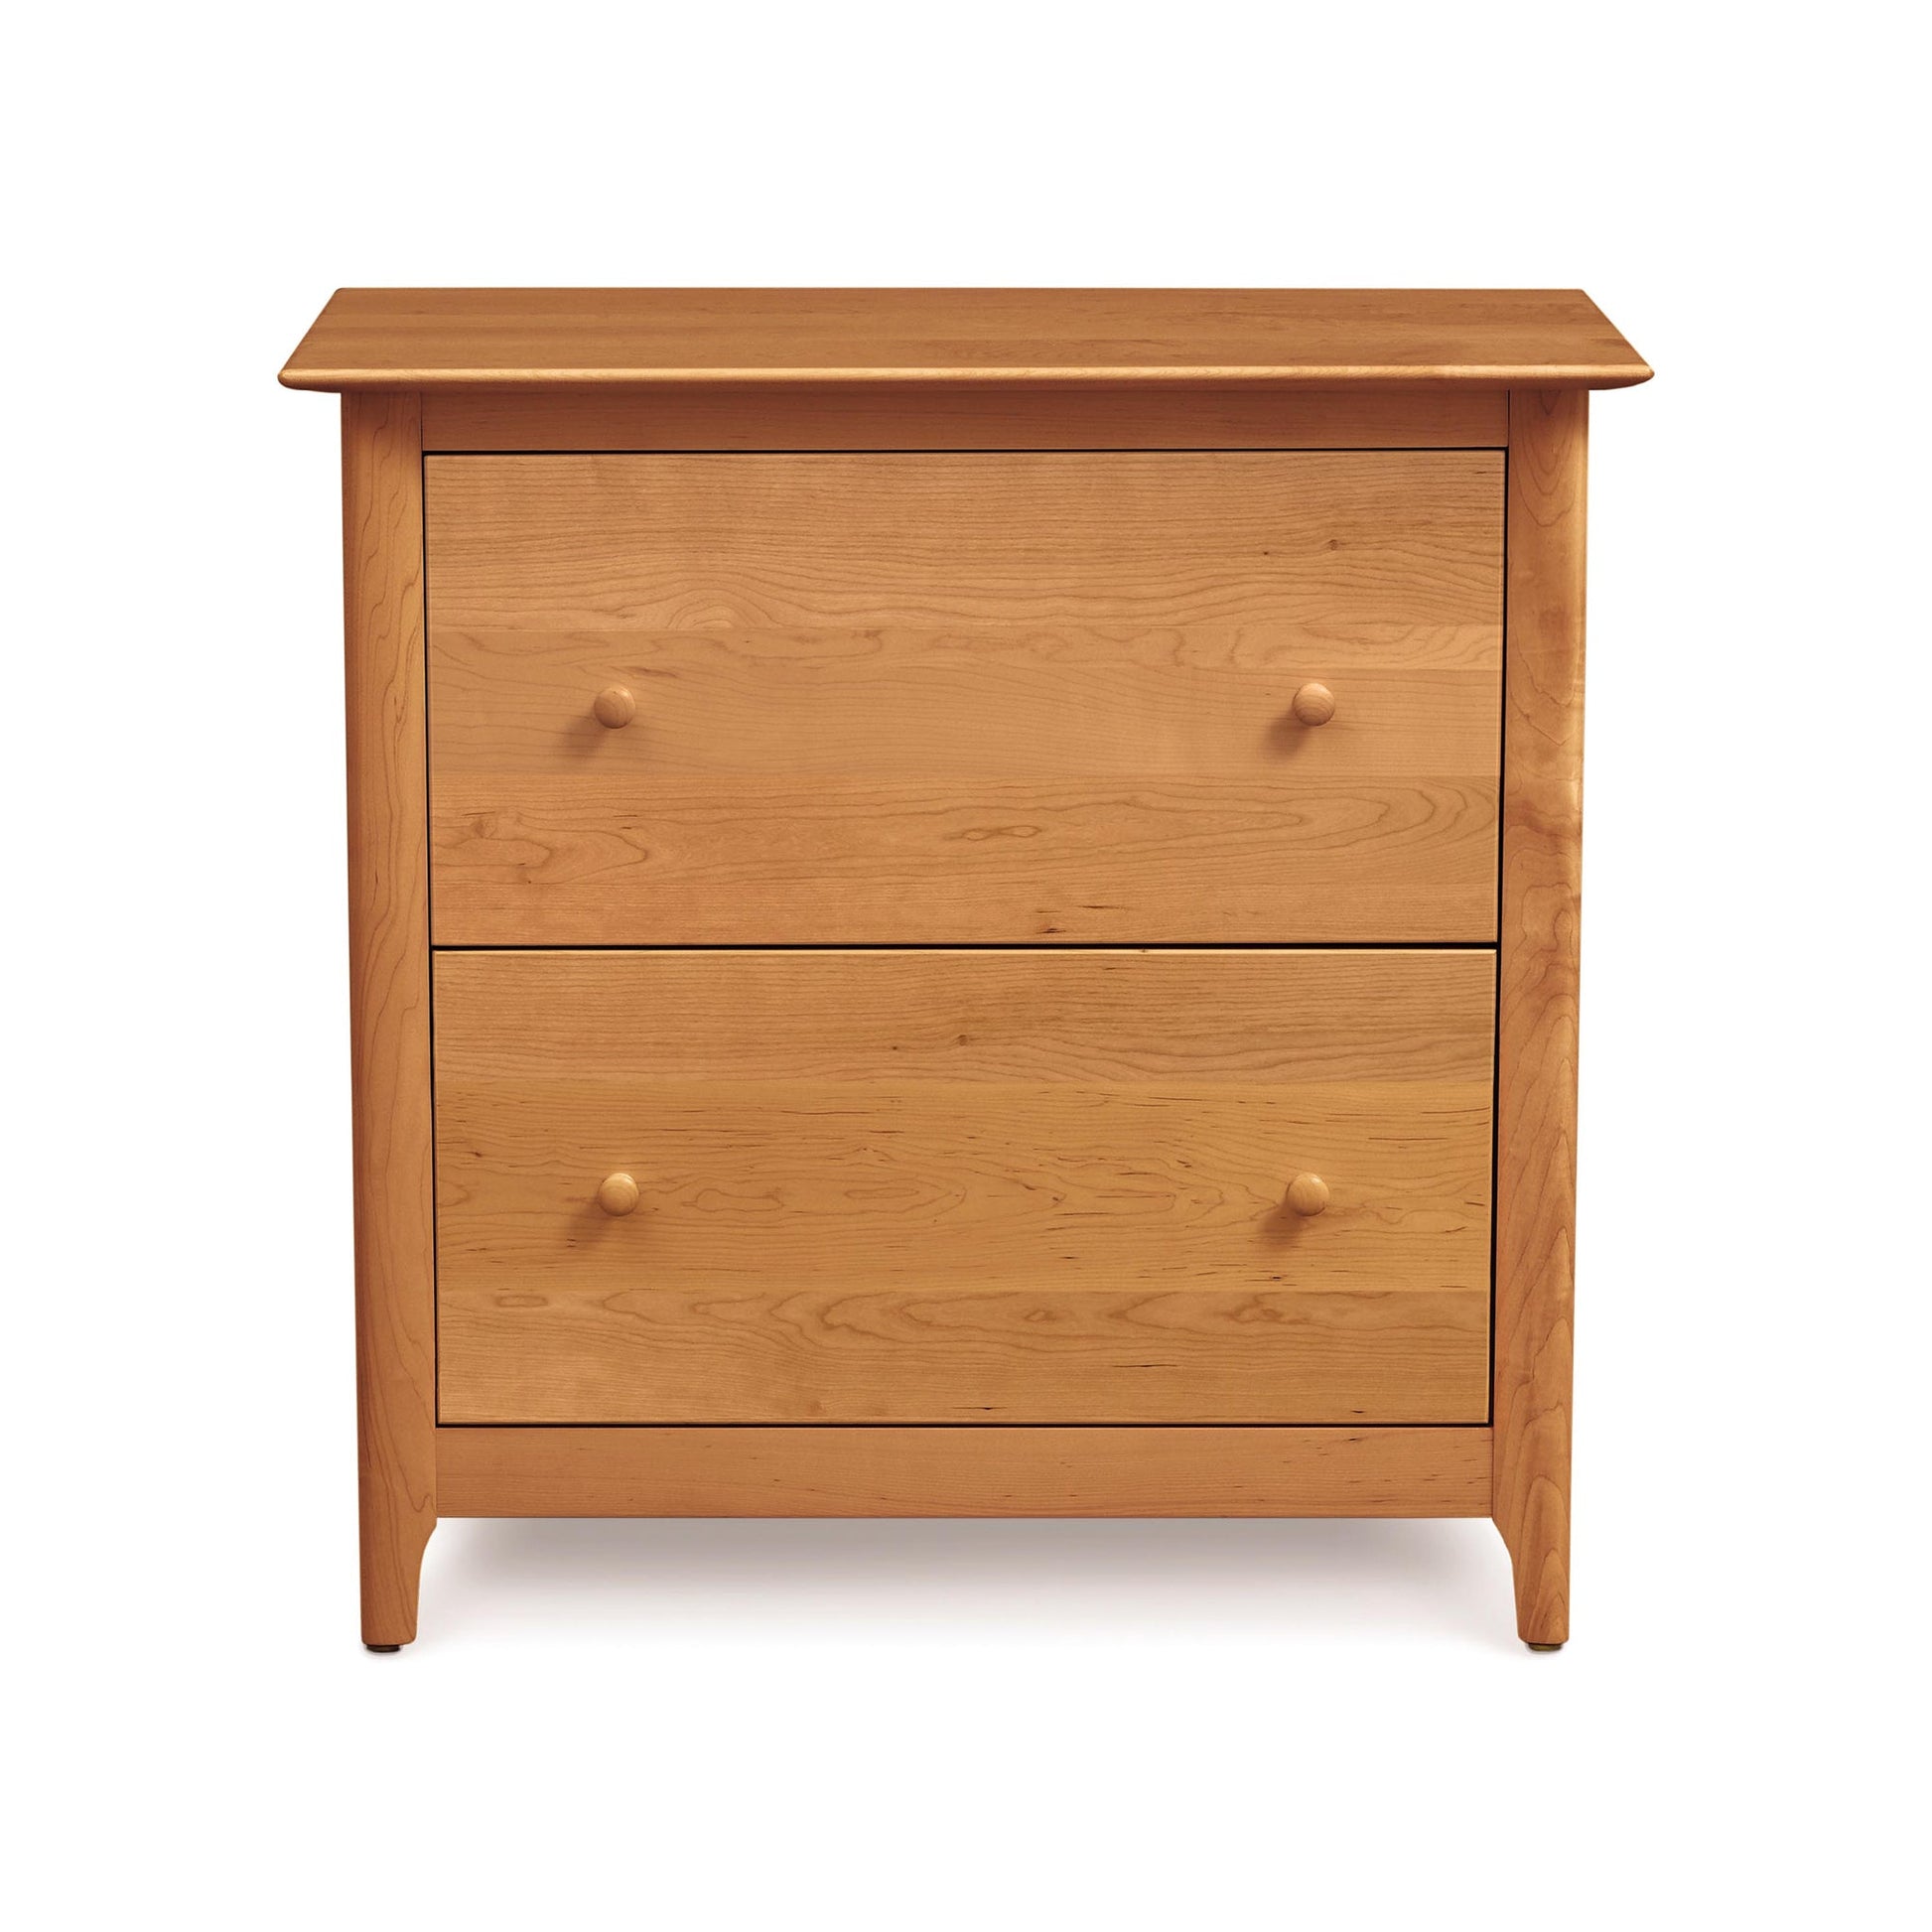 A wooden chest of drawers with two drawers.